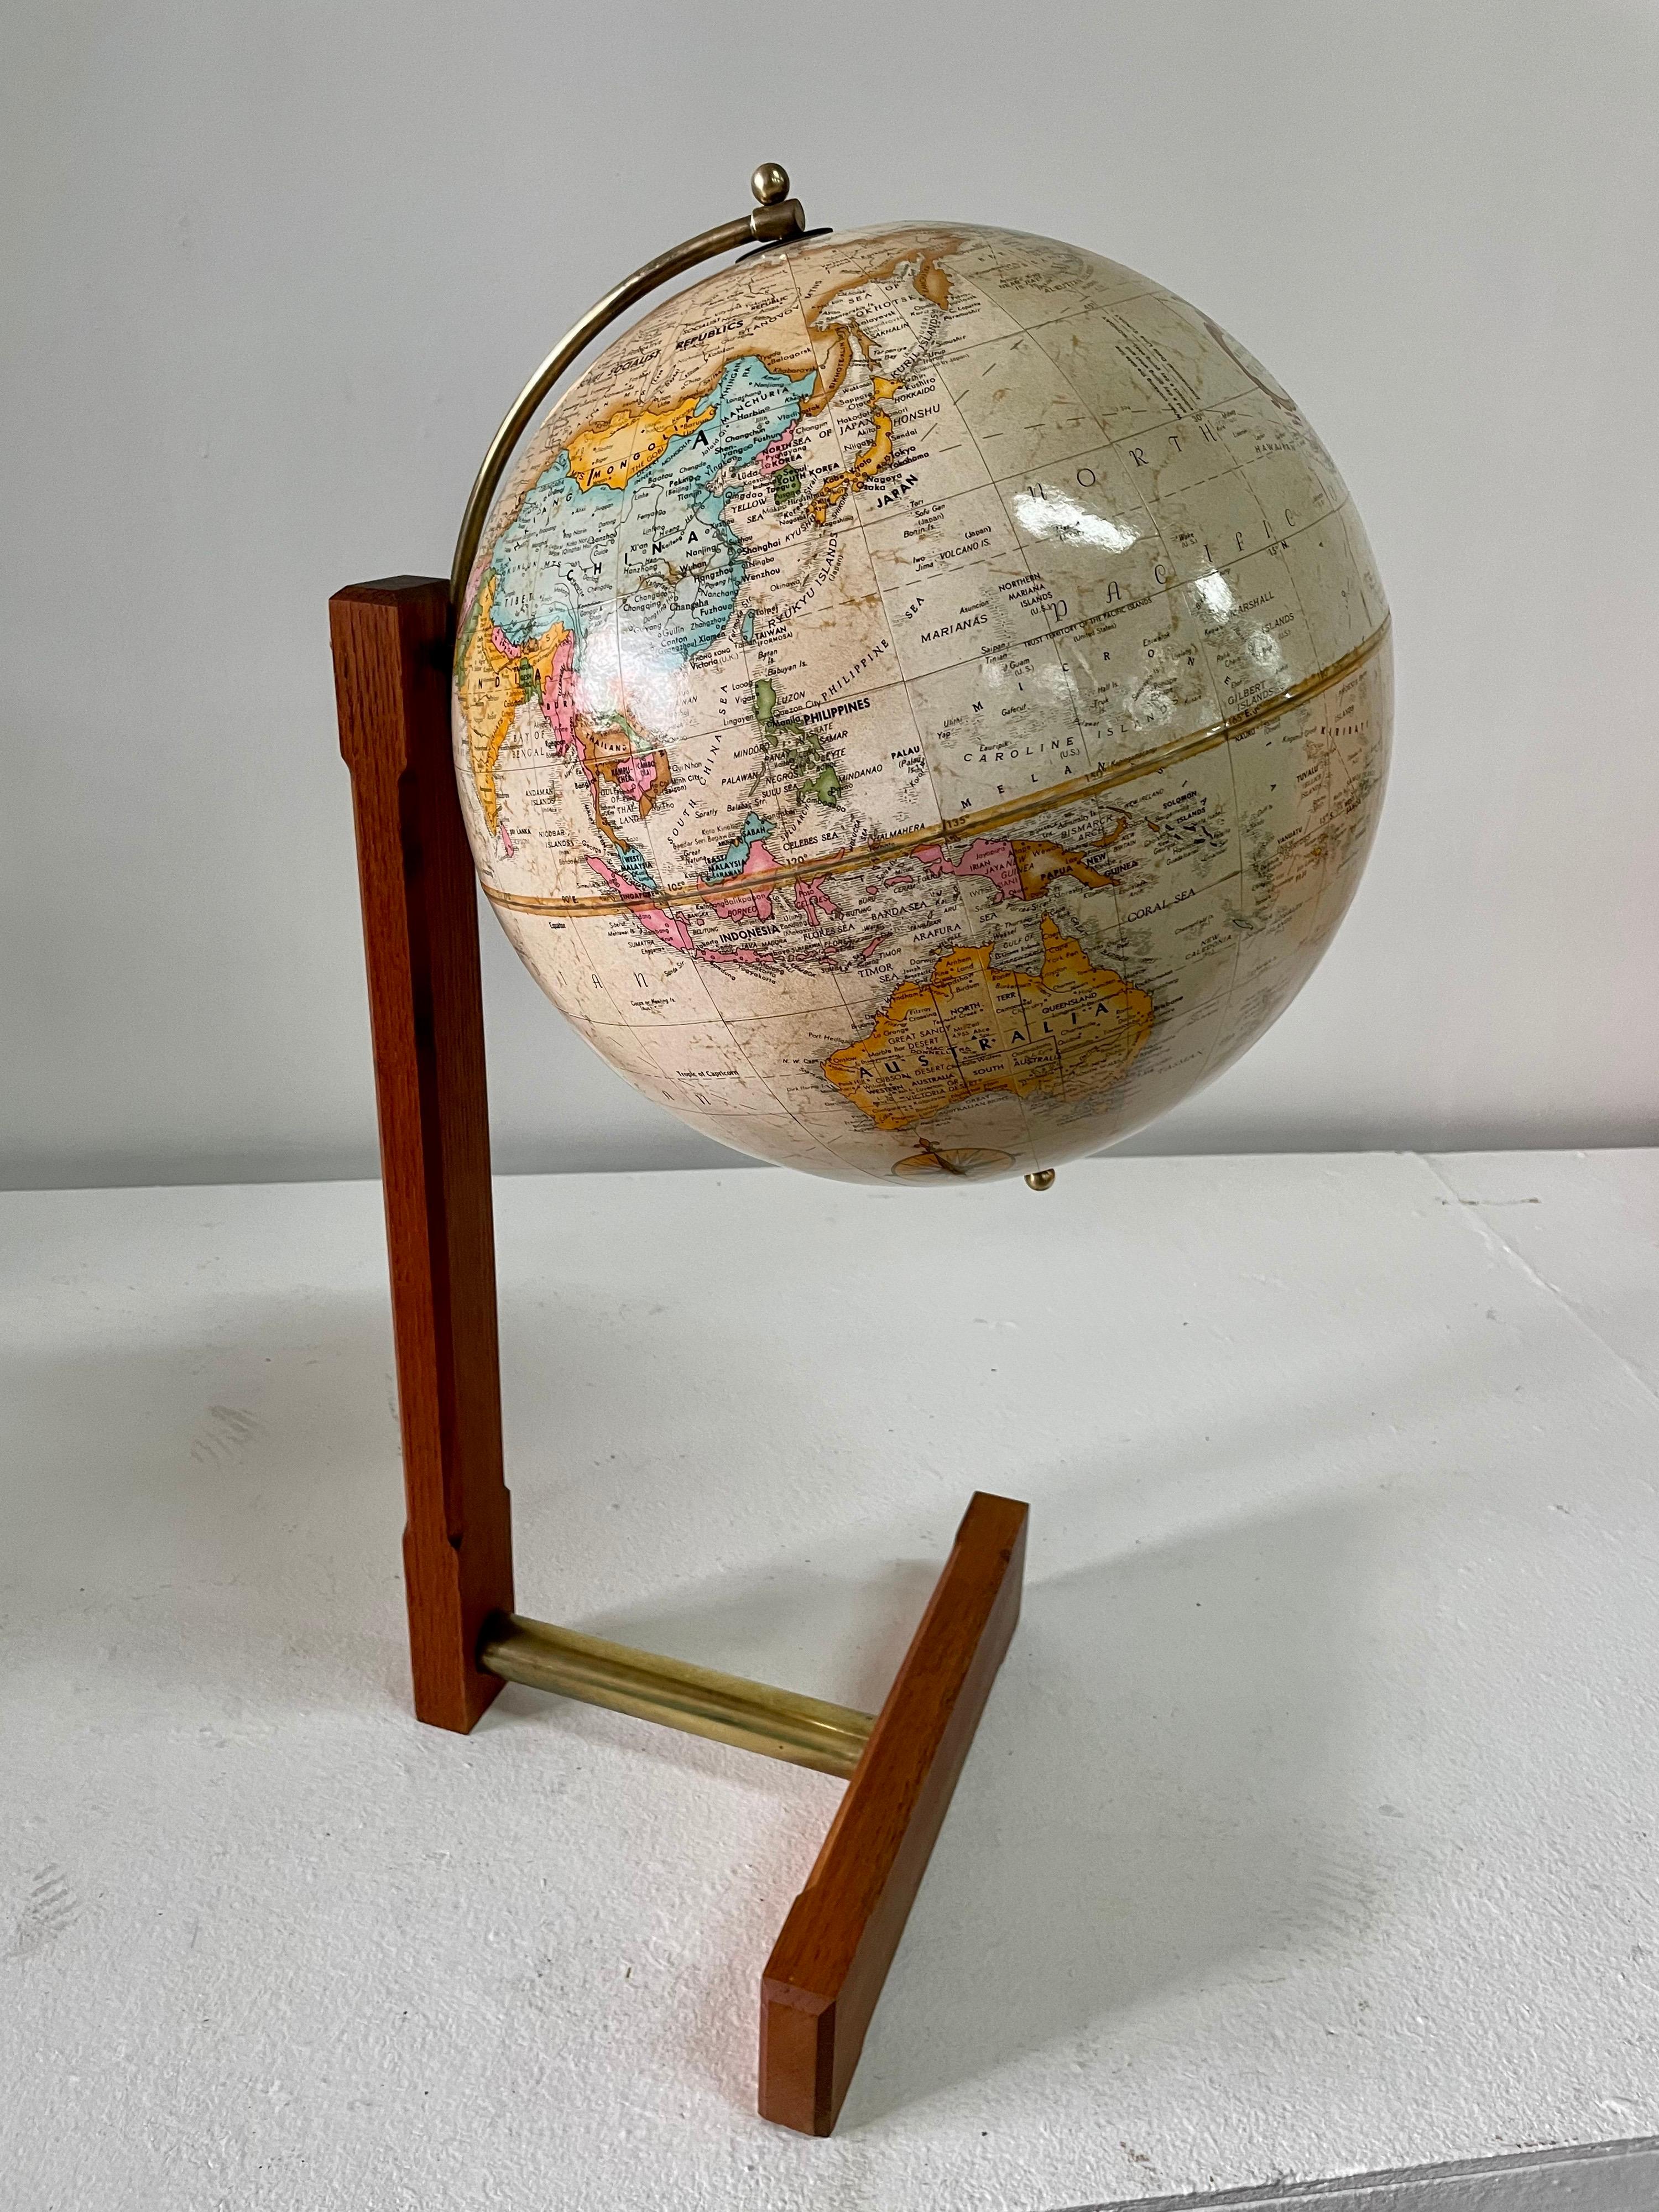 This Arts & Crafts style floor height world globe made by Replogle Company in the 1960's, is on a super original cantilever base with brass rod and teak frame. Very clean 16 inch diameter globe shows the former Soviet Union and other former